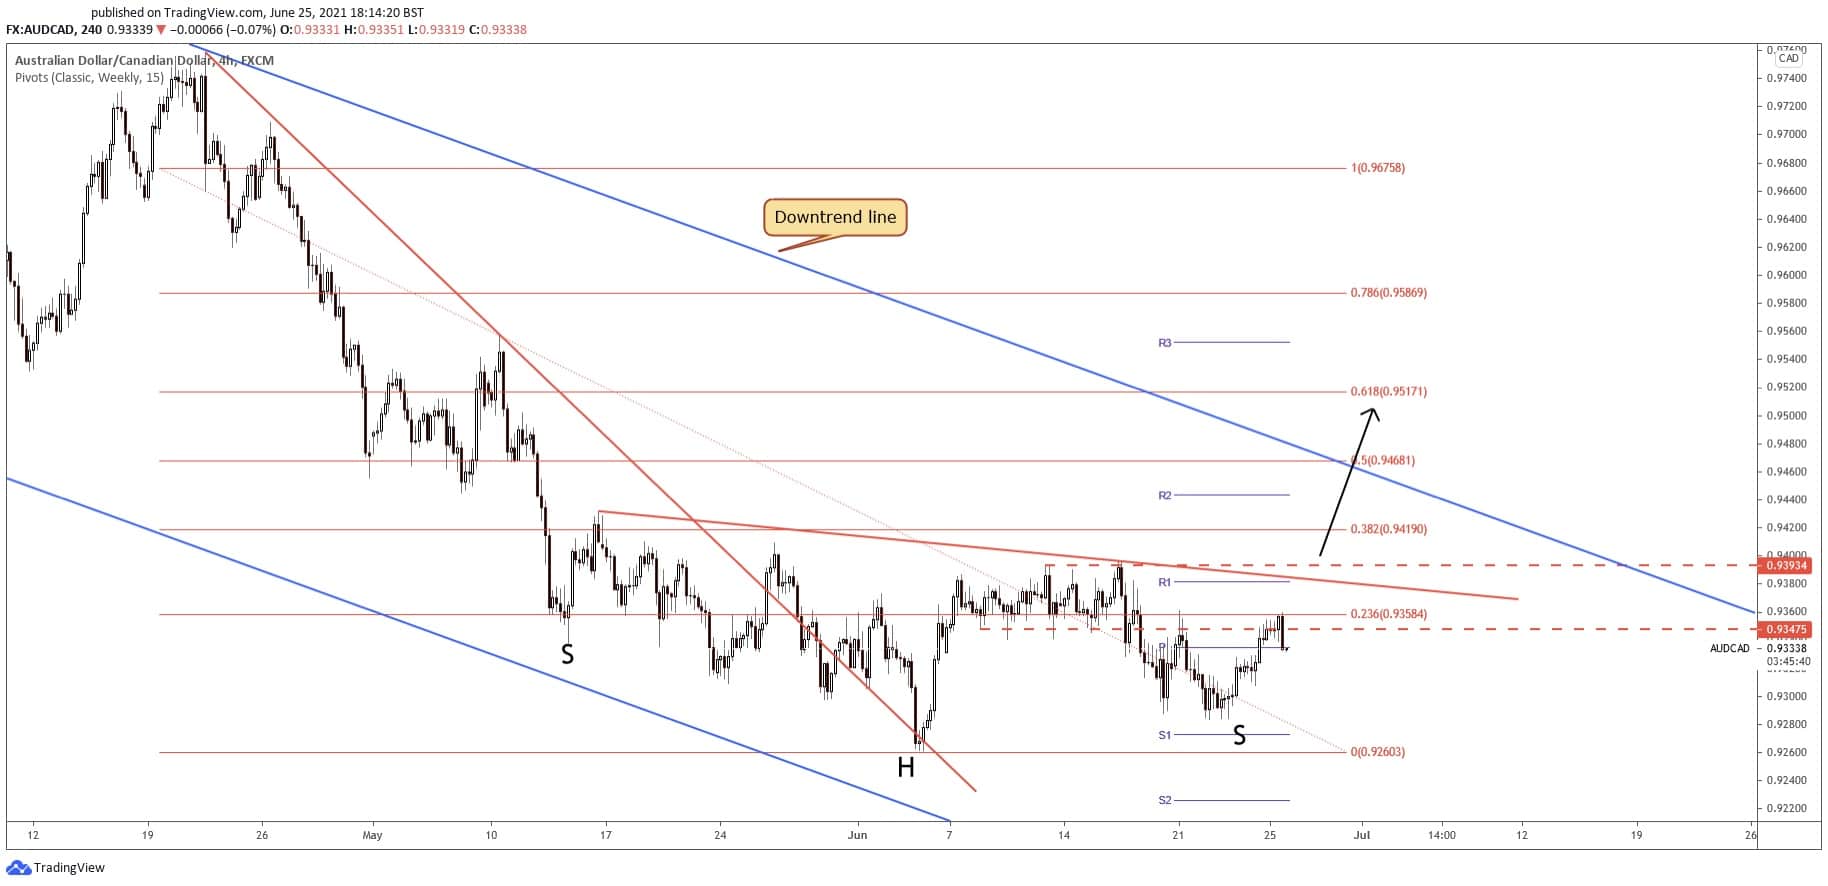 aud/cad forecast - price chart 28 june 2021